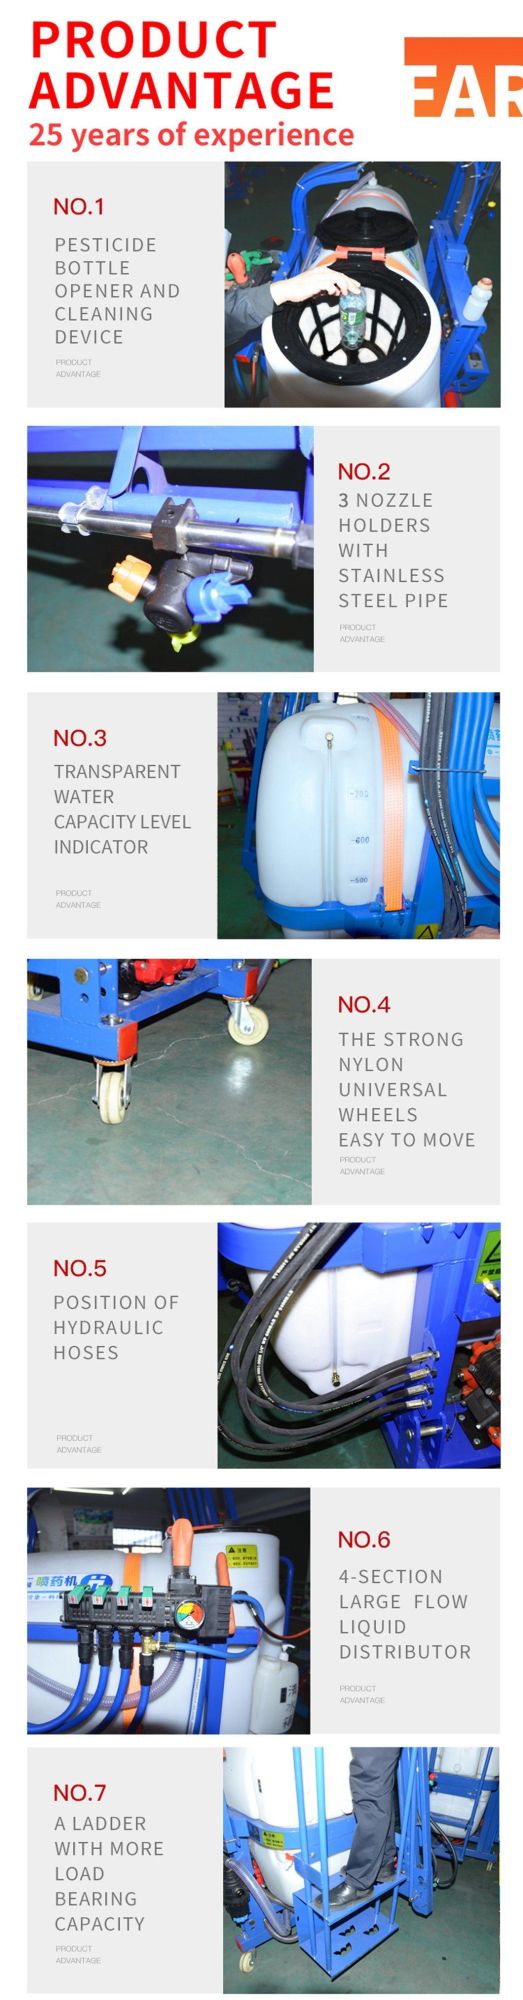 Farm Pesticide Tractor Machine Battery Corn Agriculture Drone Implement Crop Agricultural Sprayer